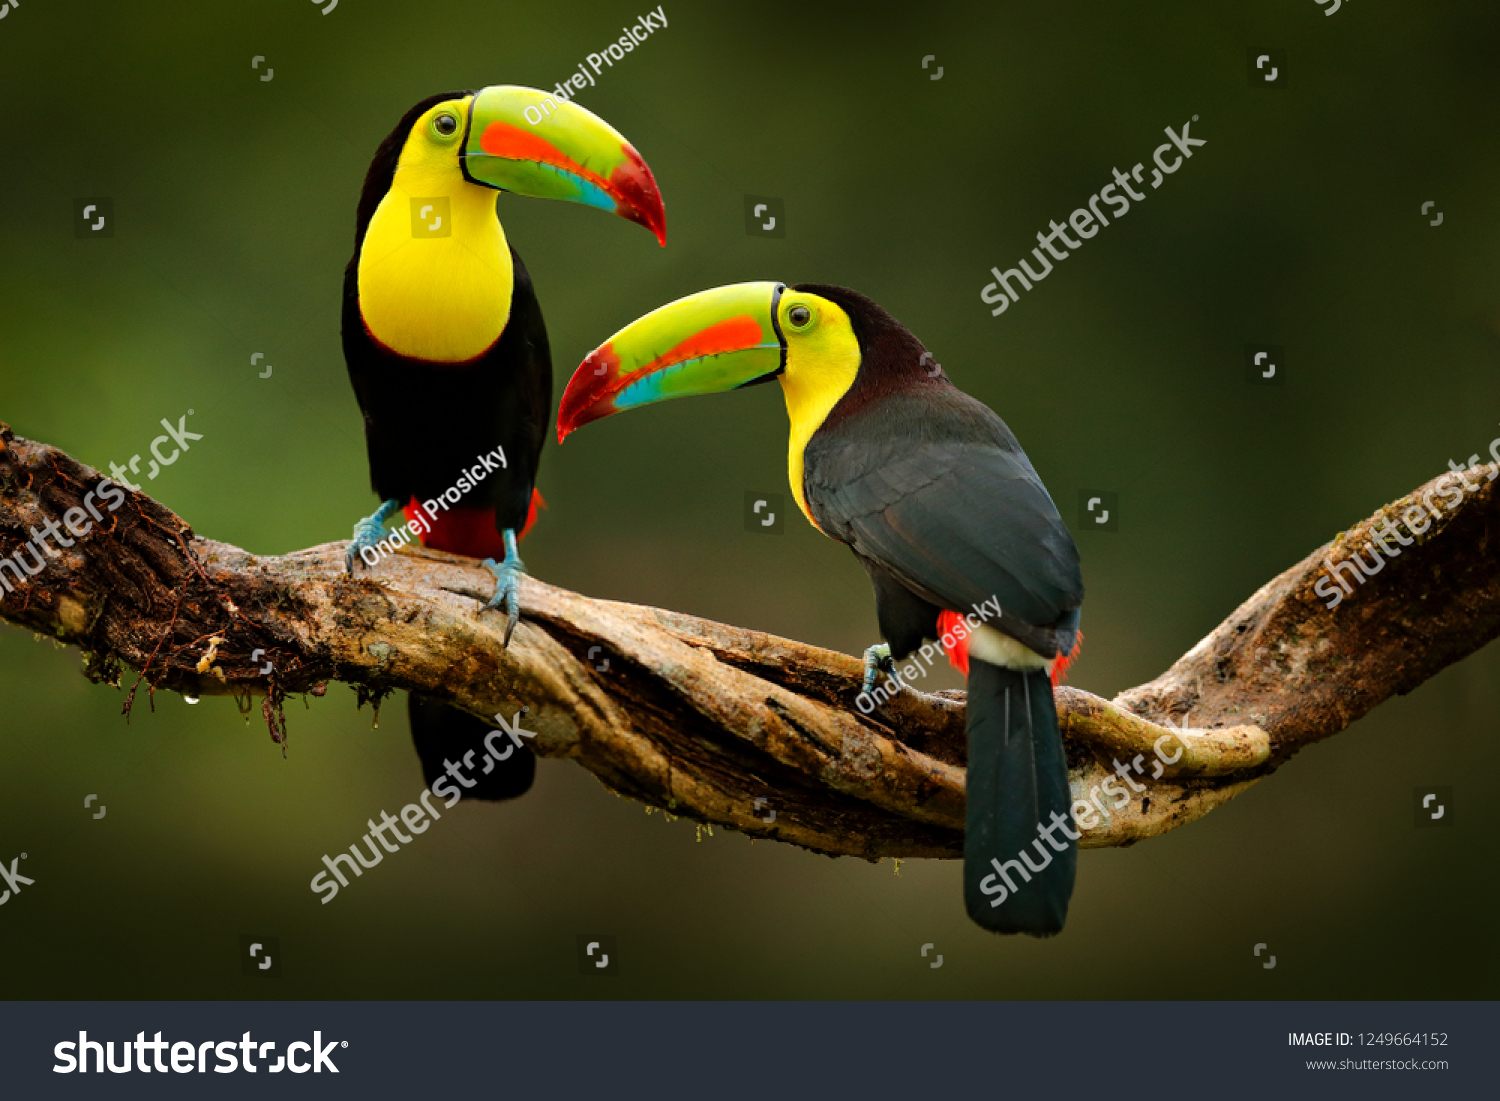 Toucan sitting on the branch in the forest, green vegetation, Costa Rica. Nature travel in central America. Two Keel-billed Toucan, Ramphastos sulfuratus, pair of bird with big bill. Wildlife. #1249664152